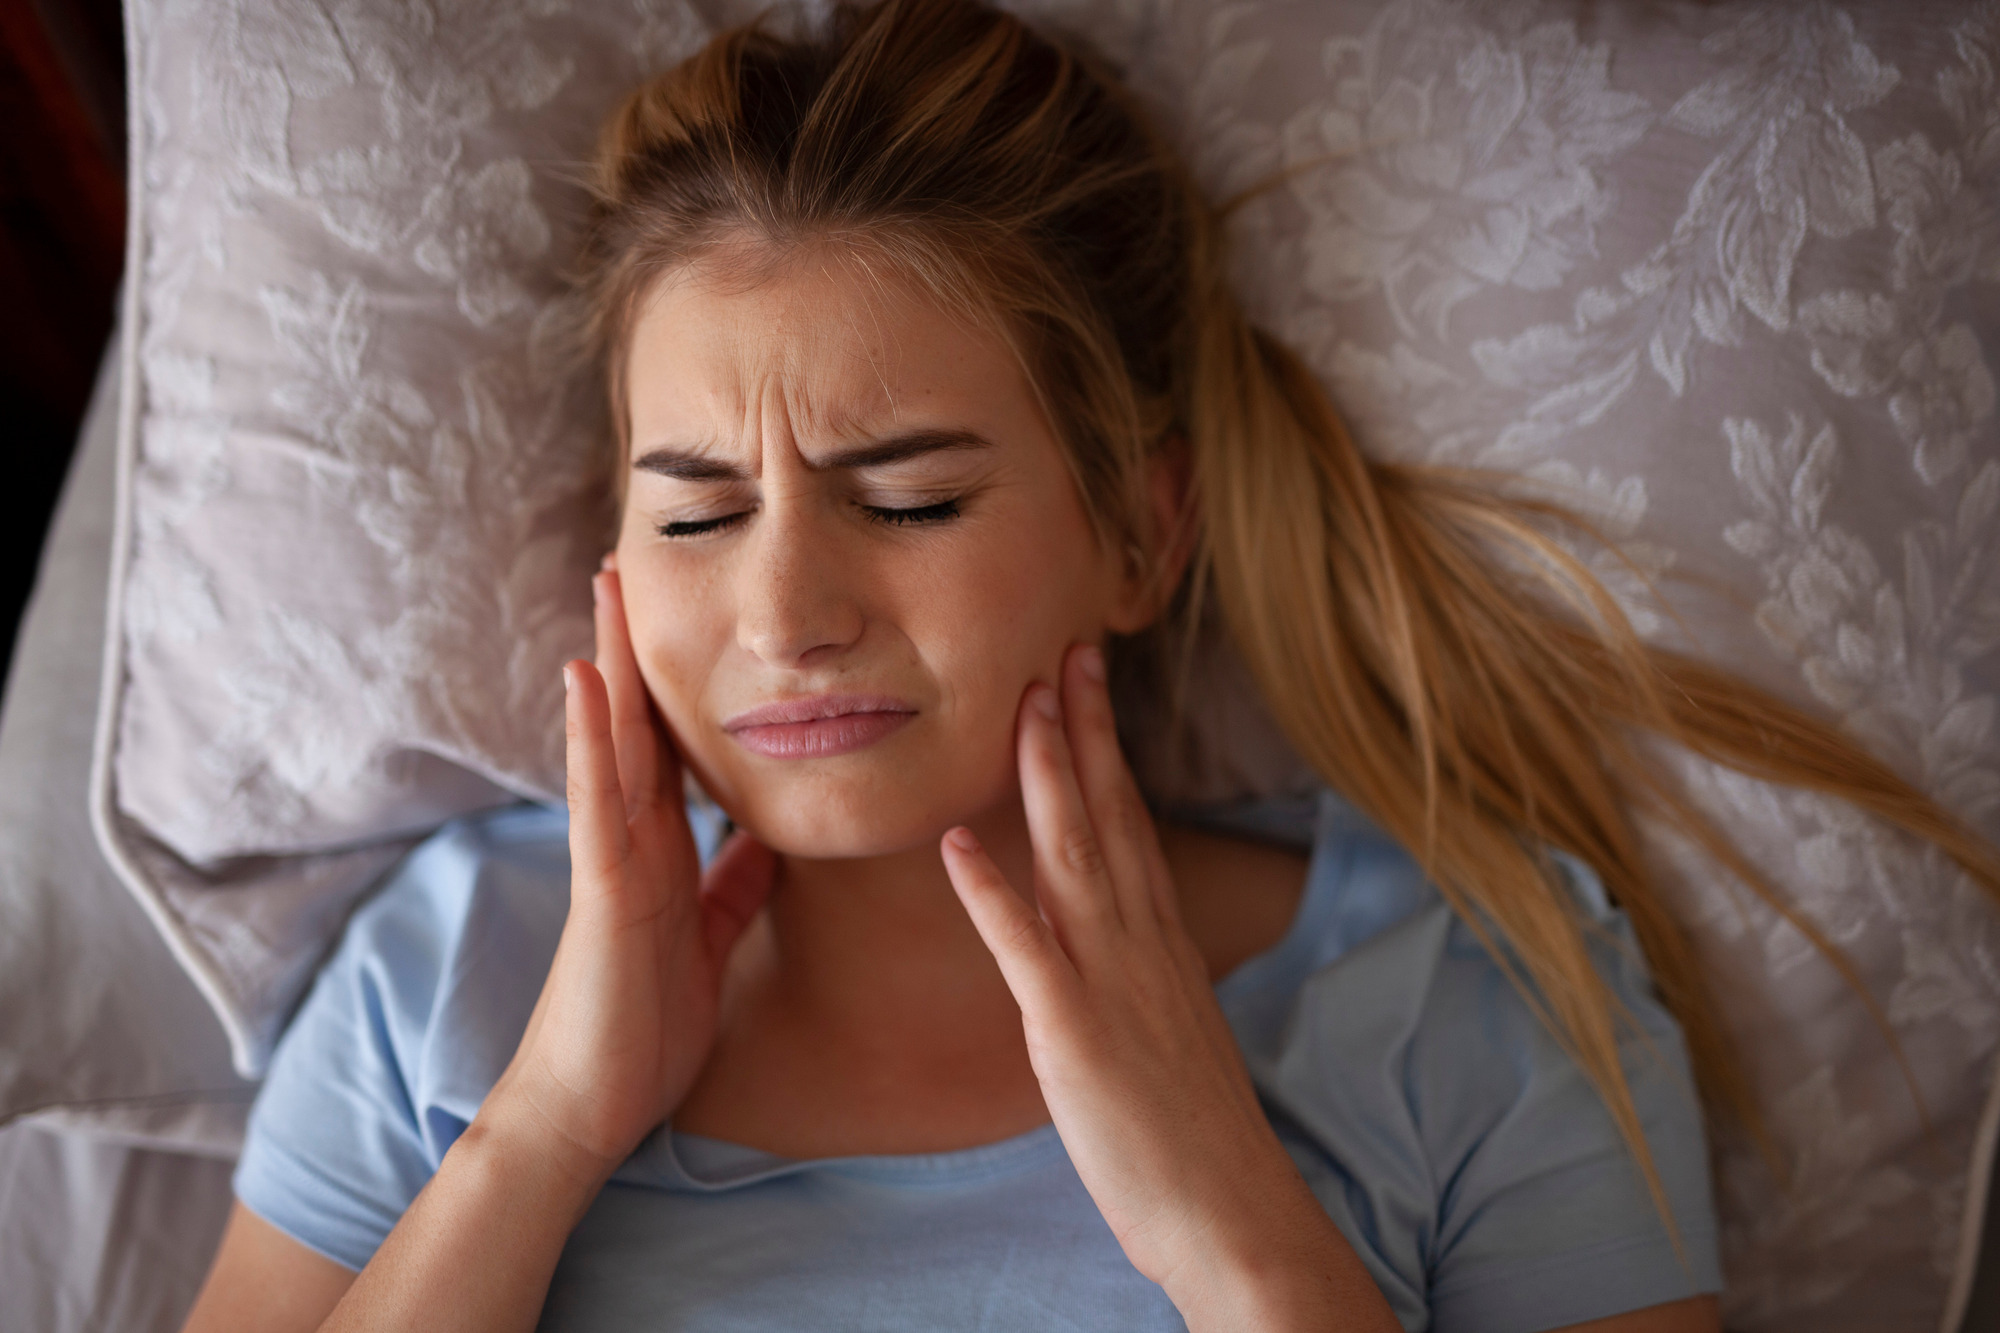 Photo of a woman dealing with Bruxism